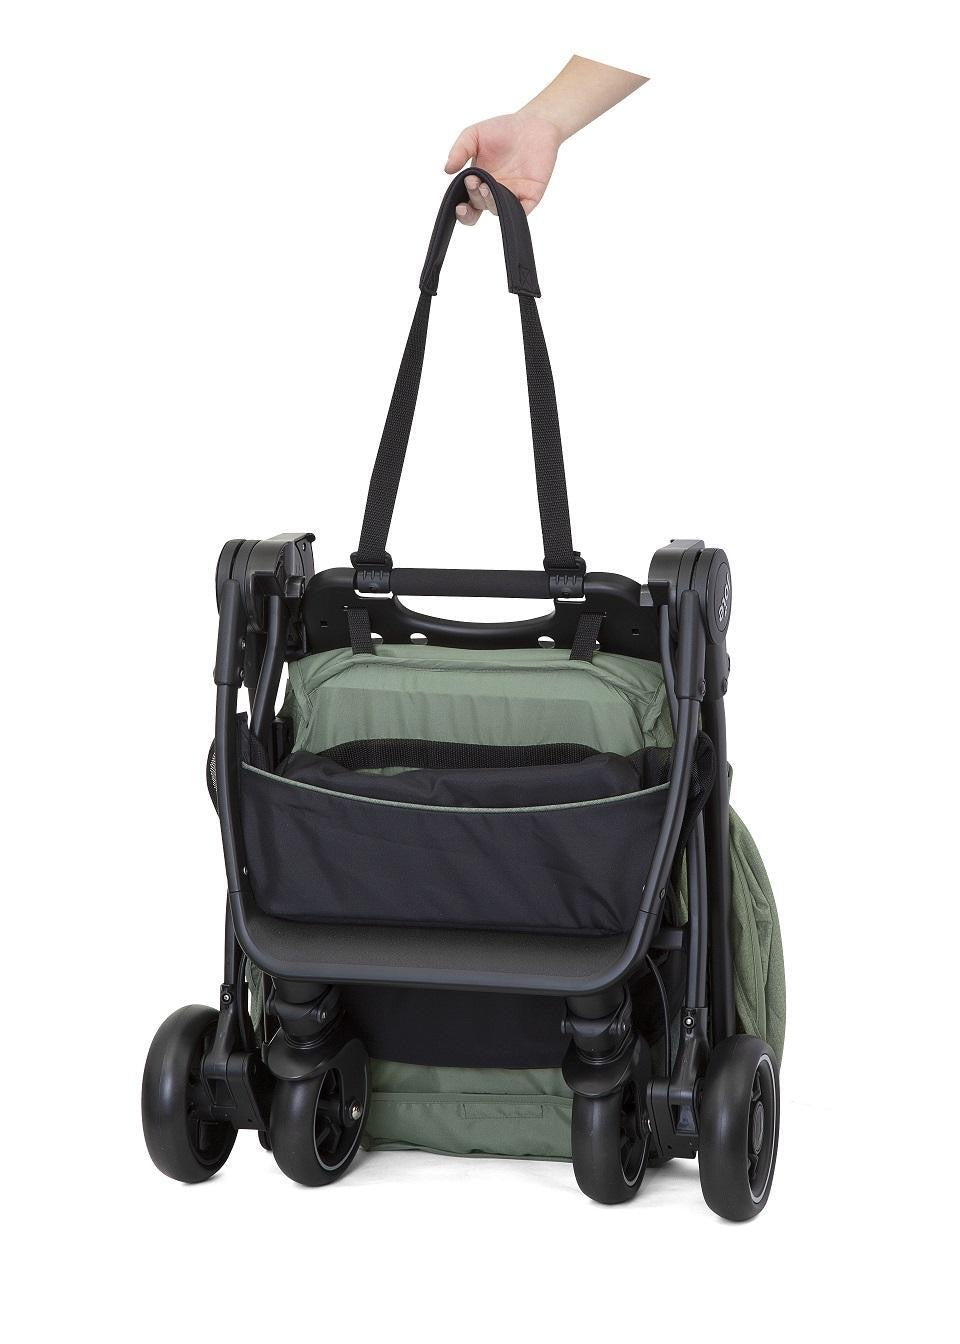 Joie Pact Stroller ( contact us on WhatsApp for price)